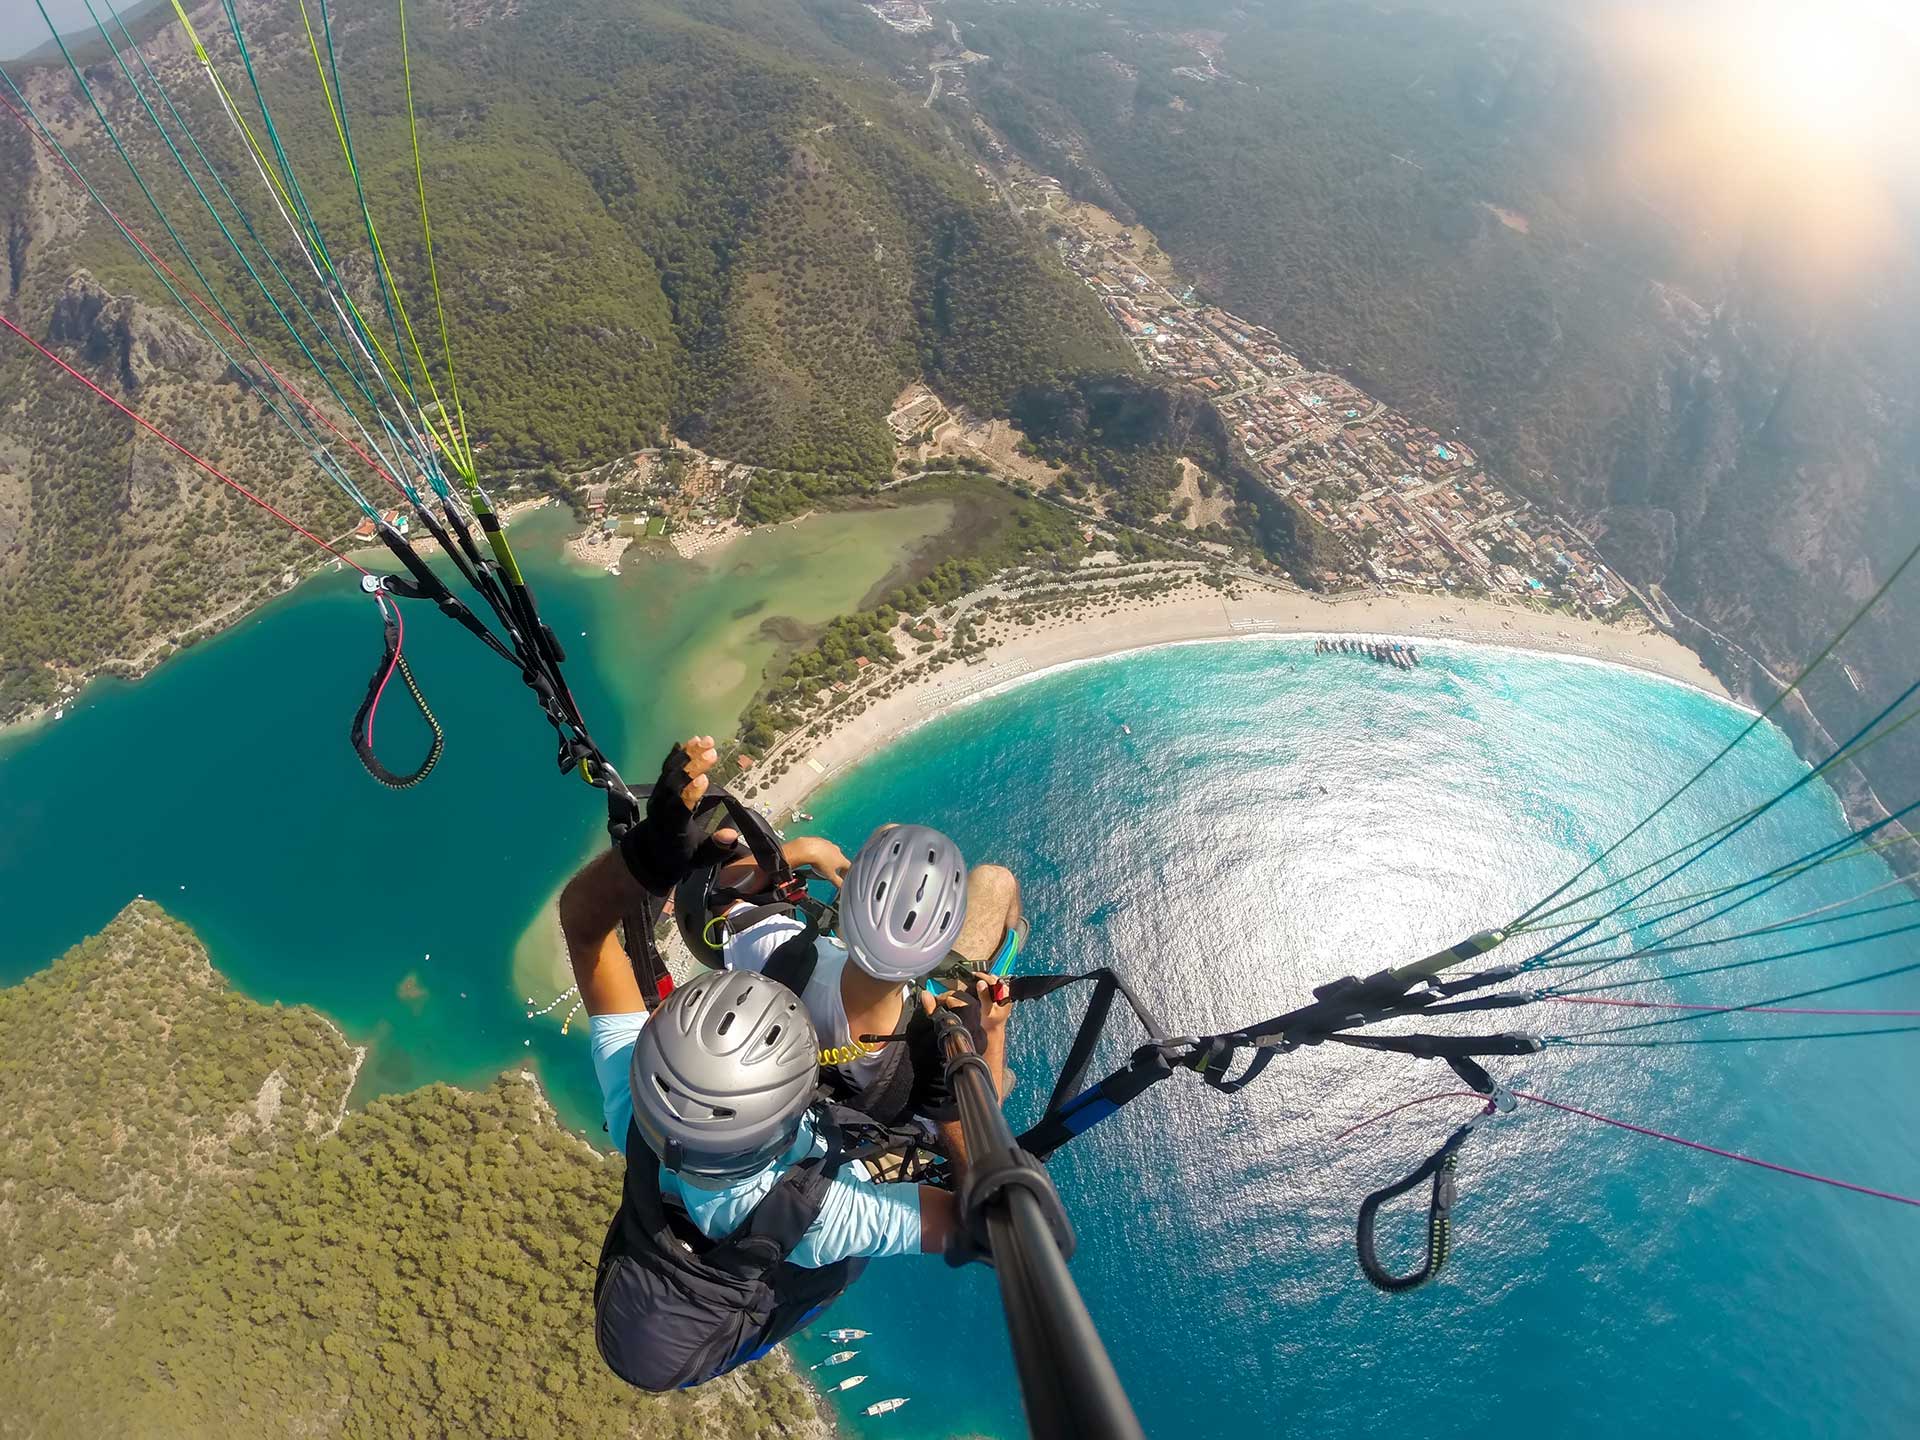 The Most Adrenaline Pumping-Activities for Thrill Seekers